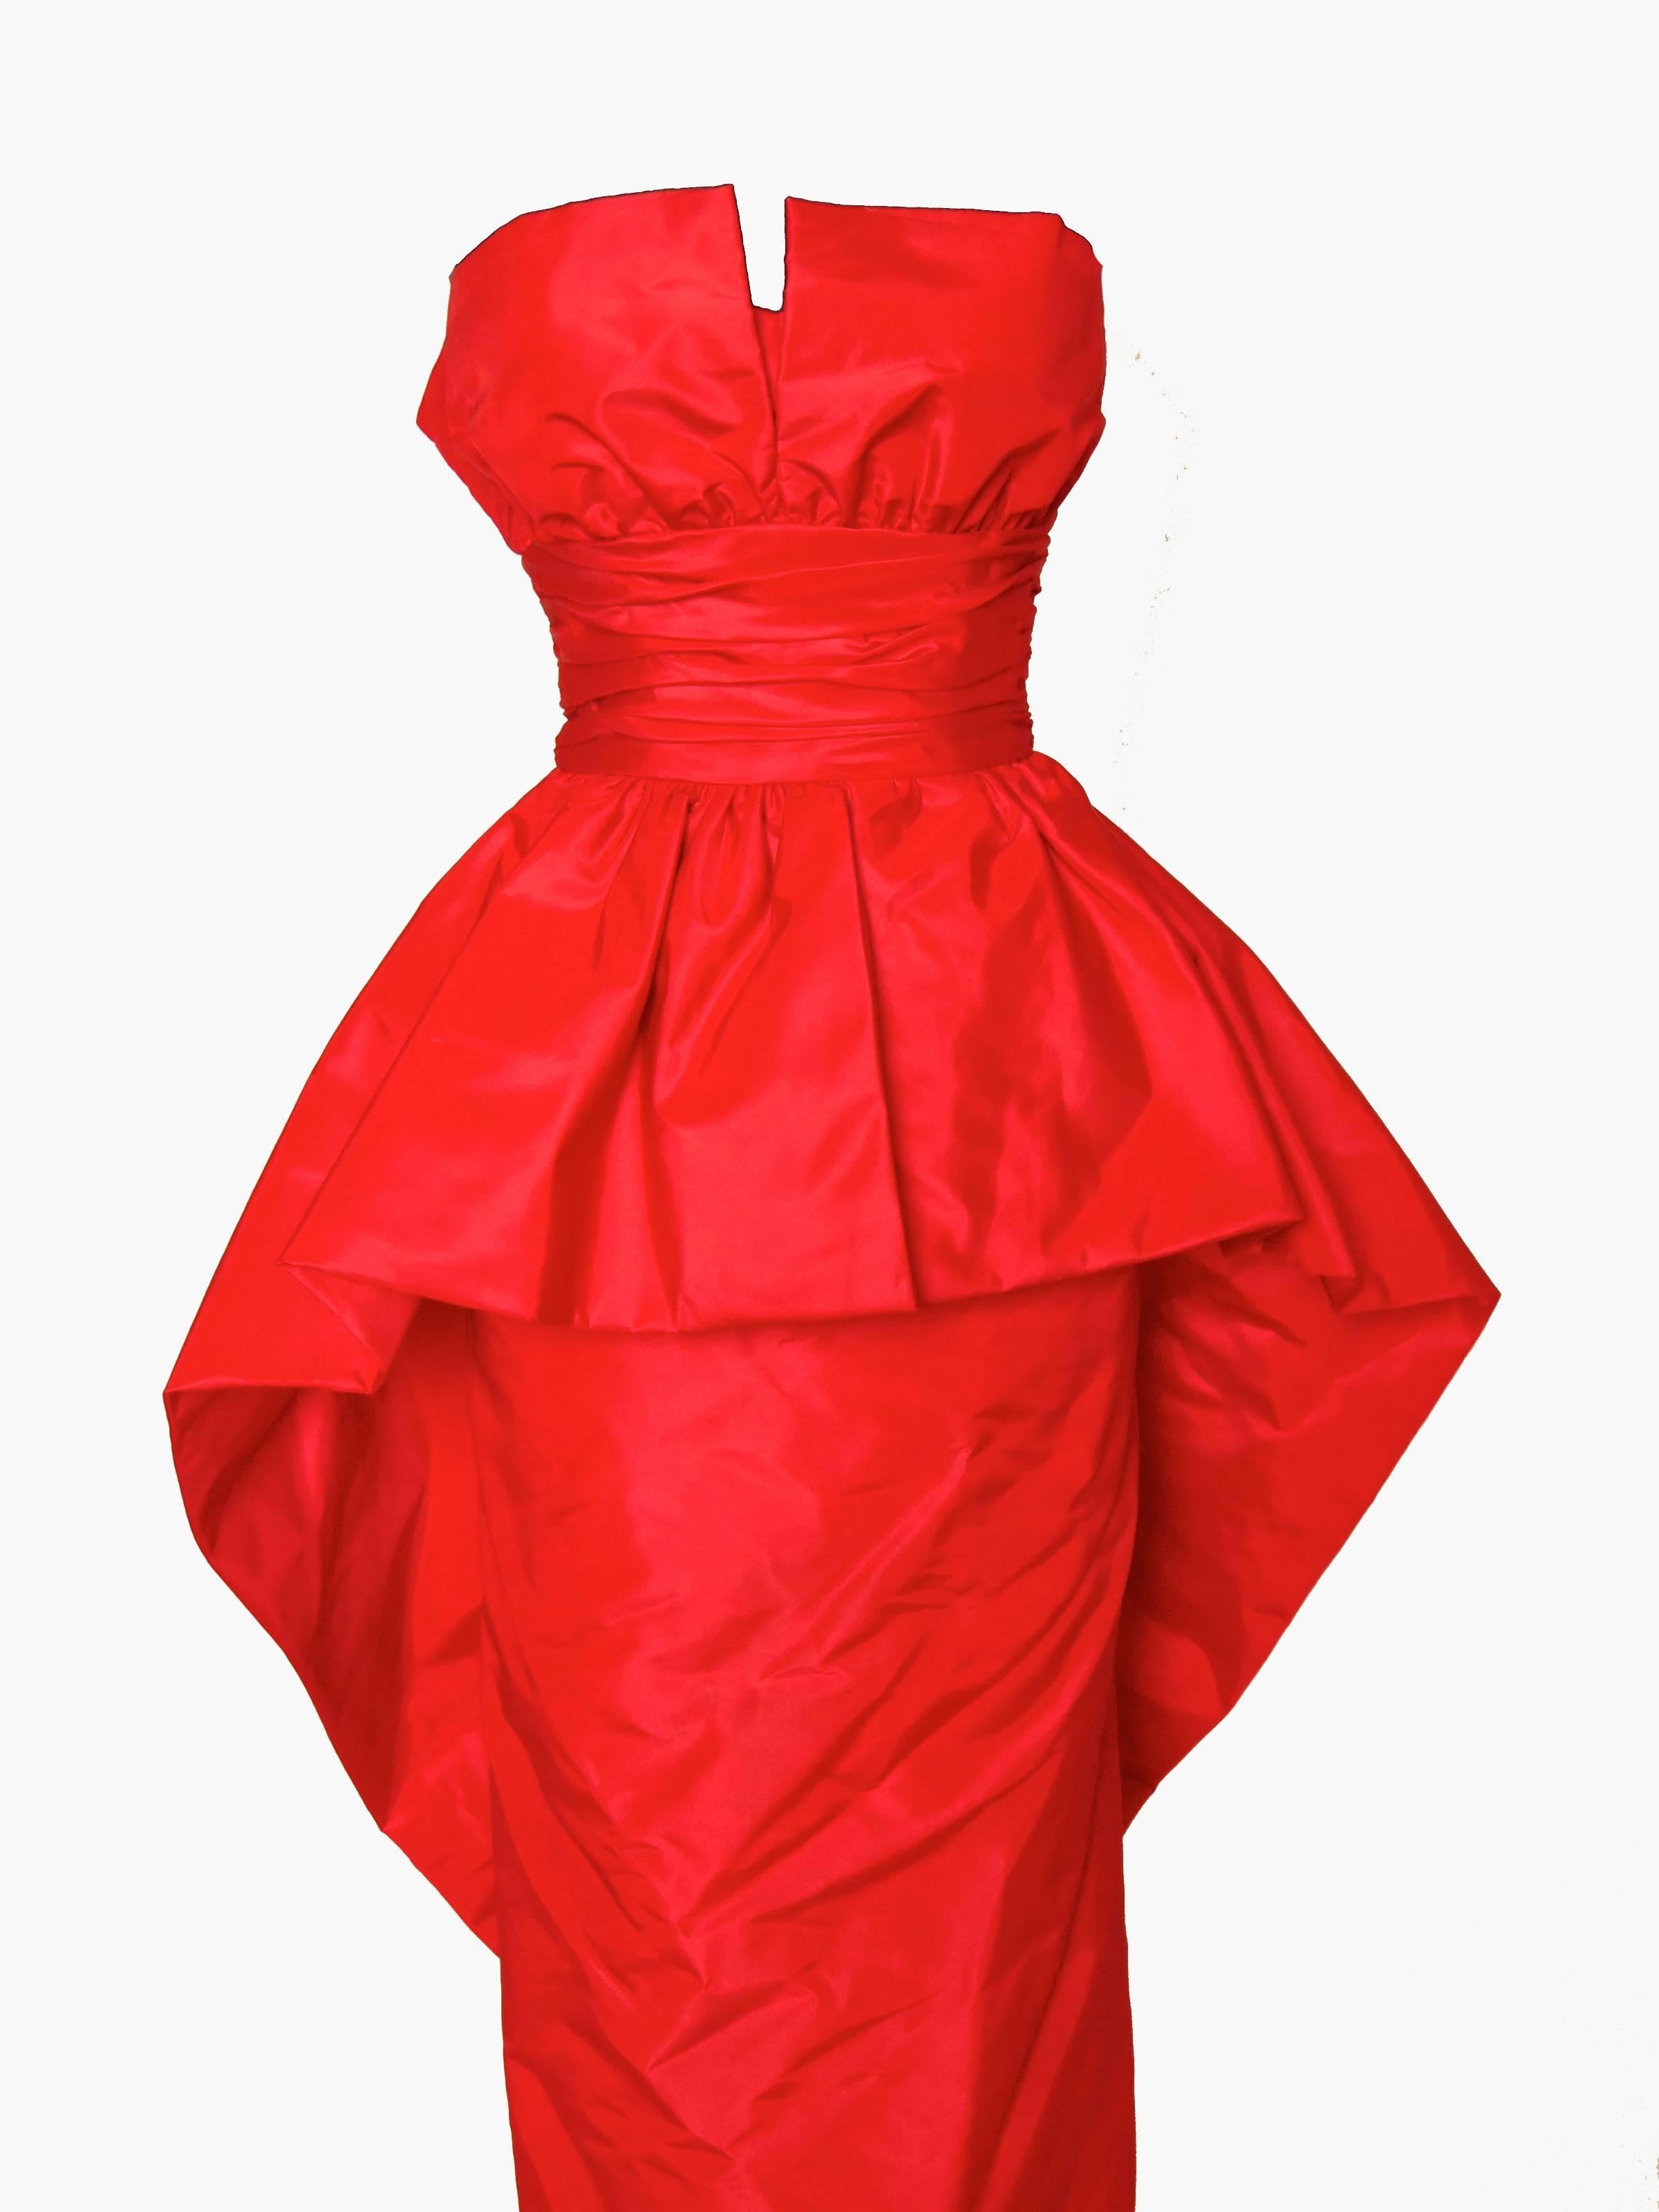 Victor Costa Bright Red Taffeta Evening Gown Strapless Sheath 1970s Size XS 4